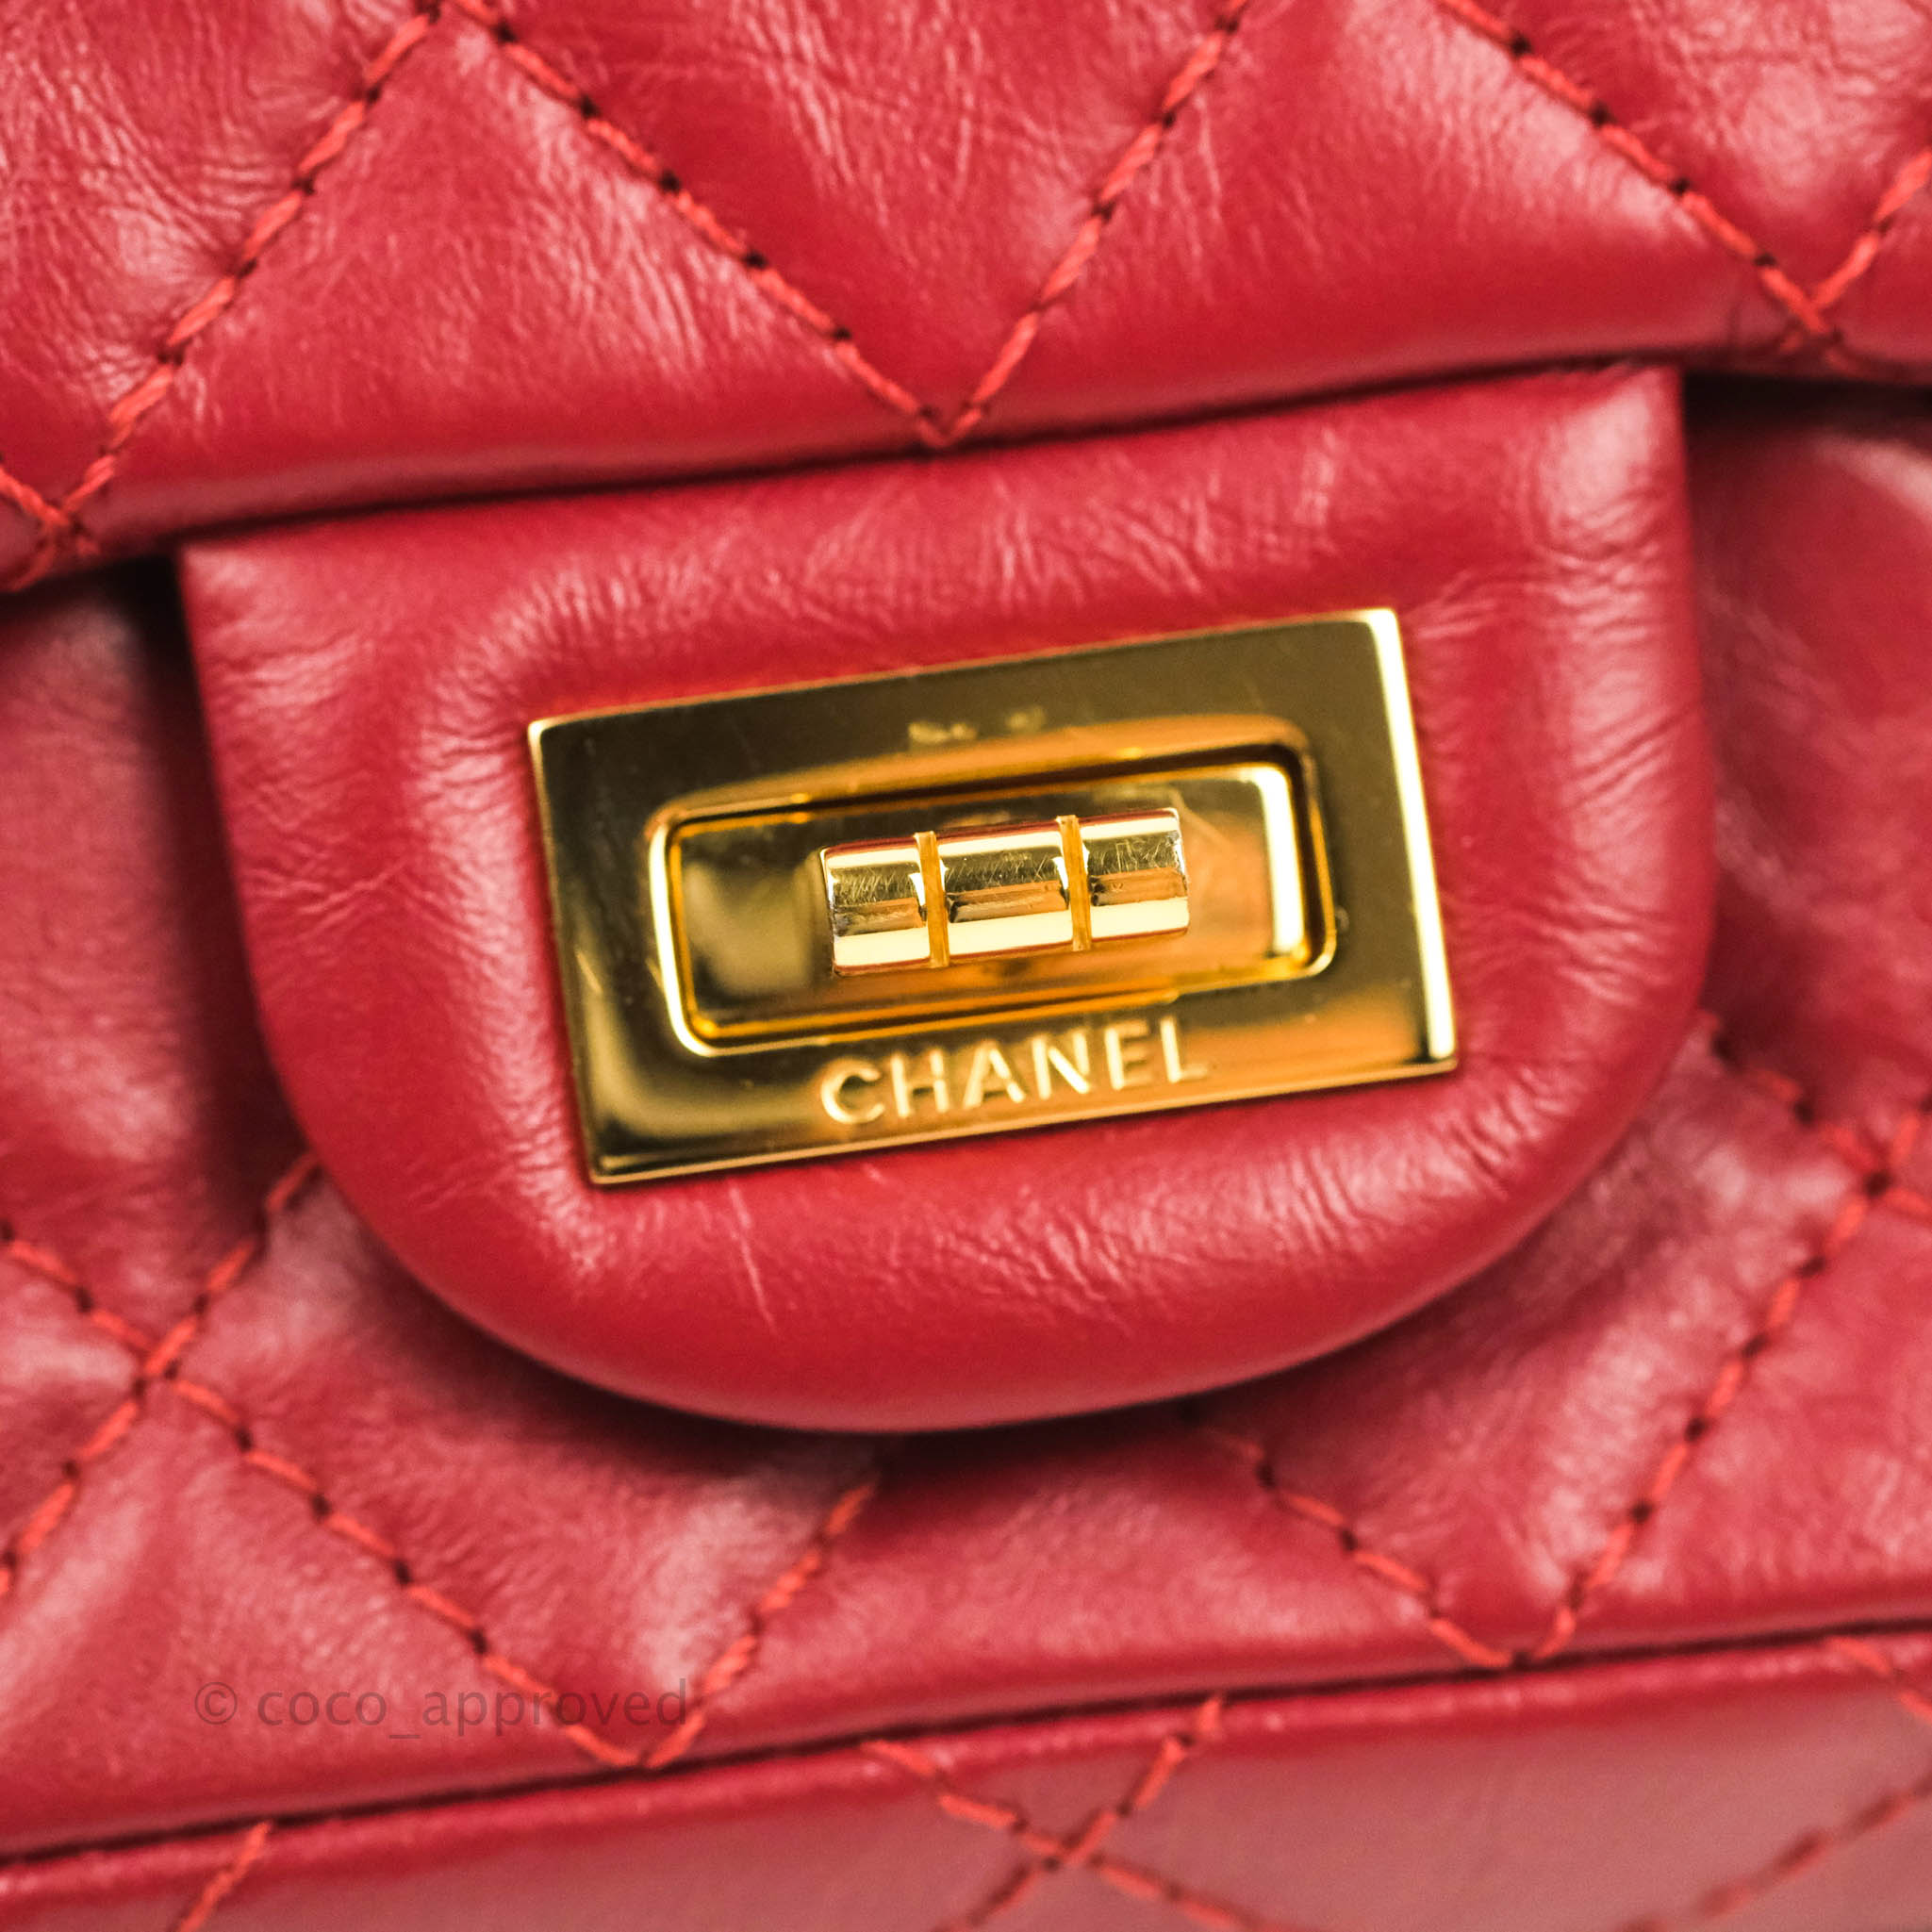 chanel classic flap bag red